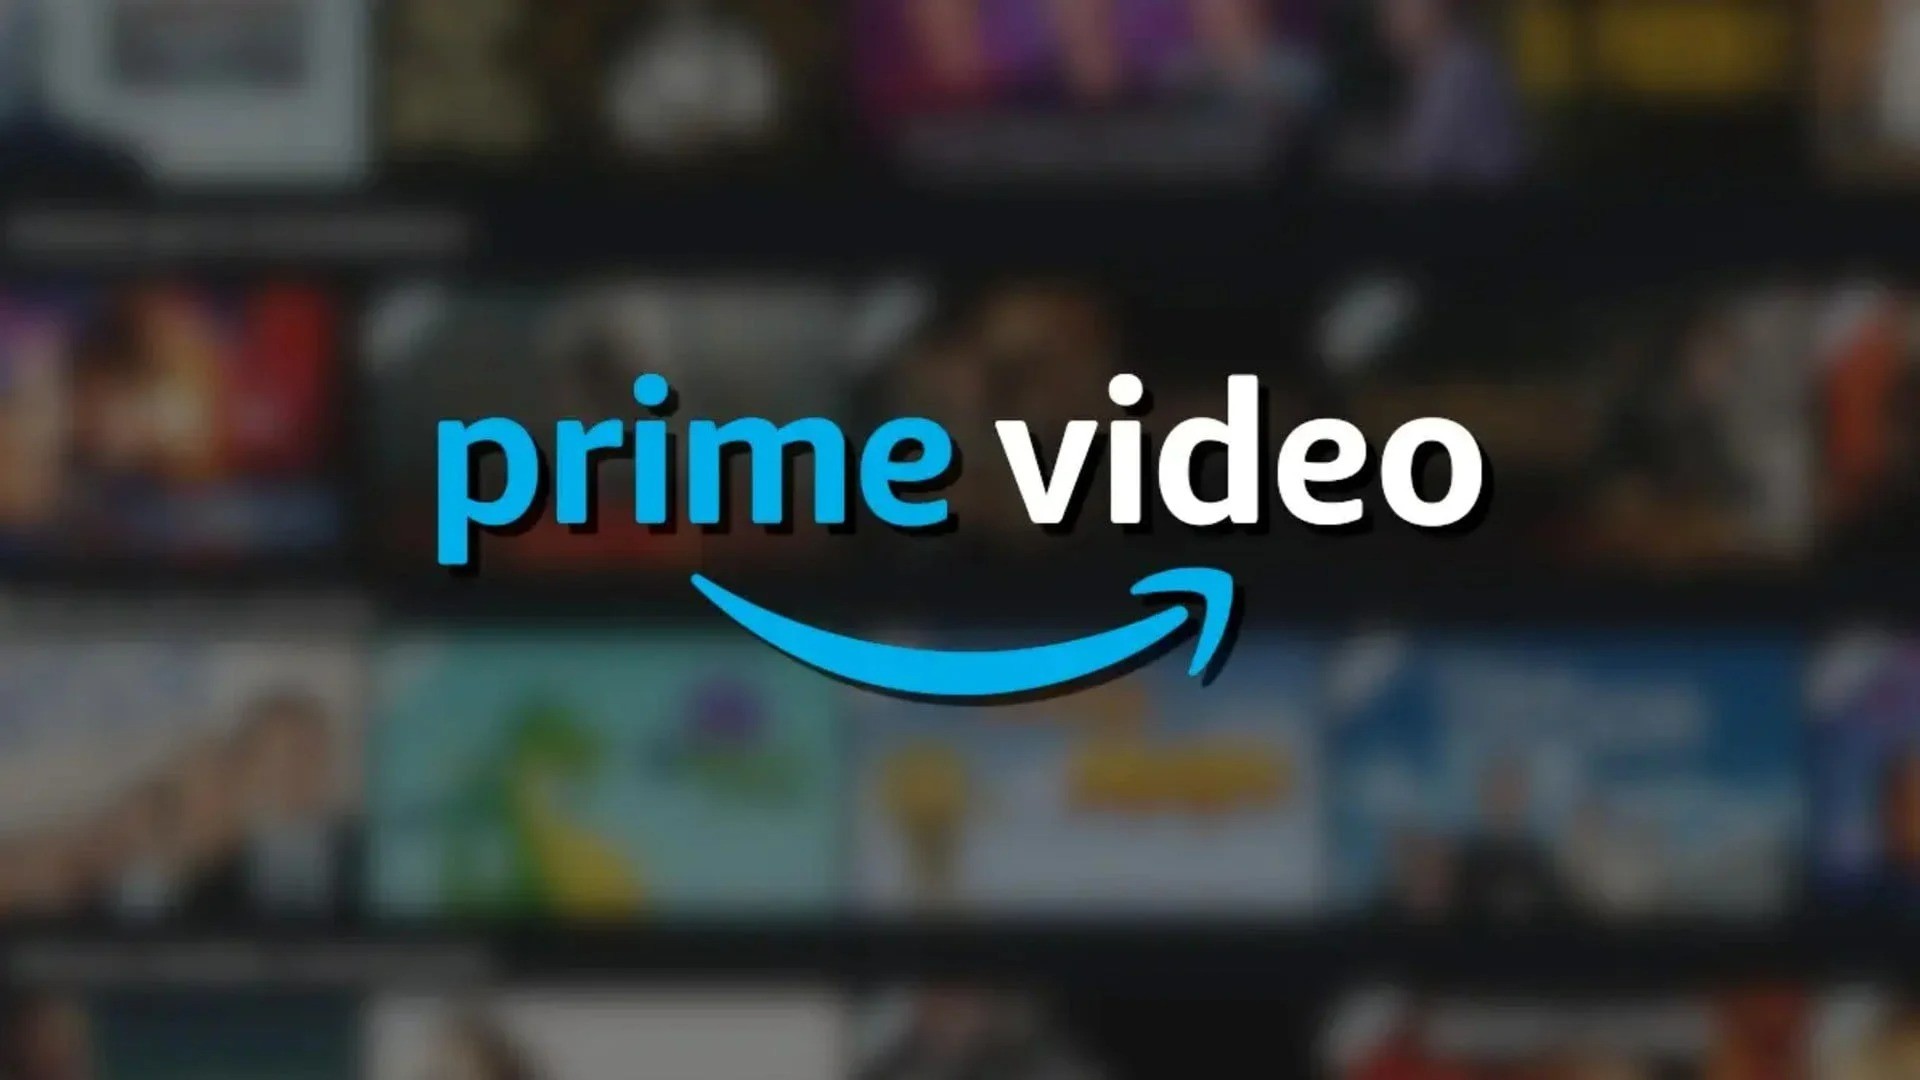 Prime Video overtakes Netflix subscribers and leads streaming in the US
